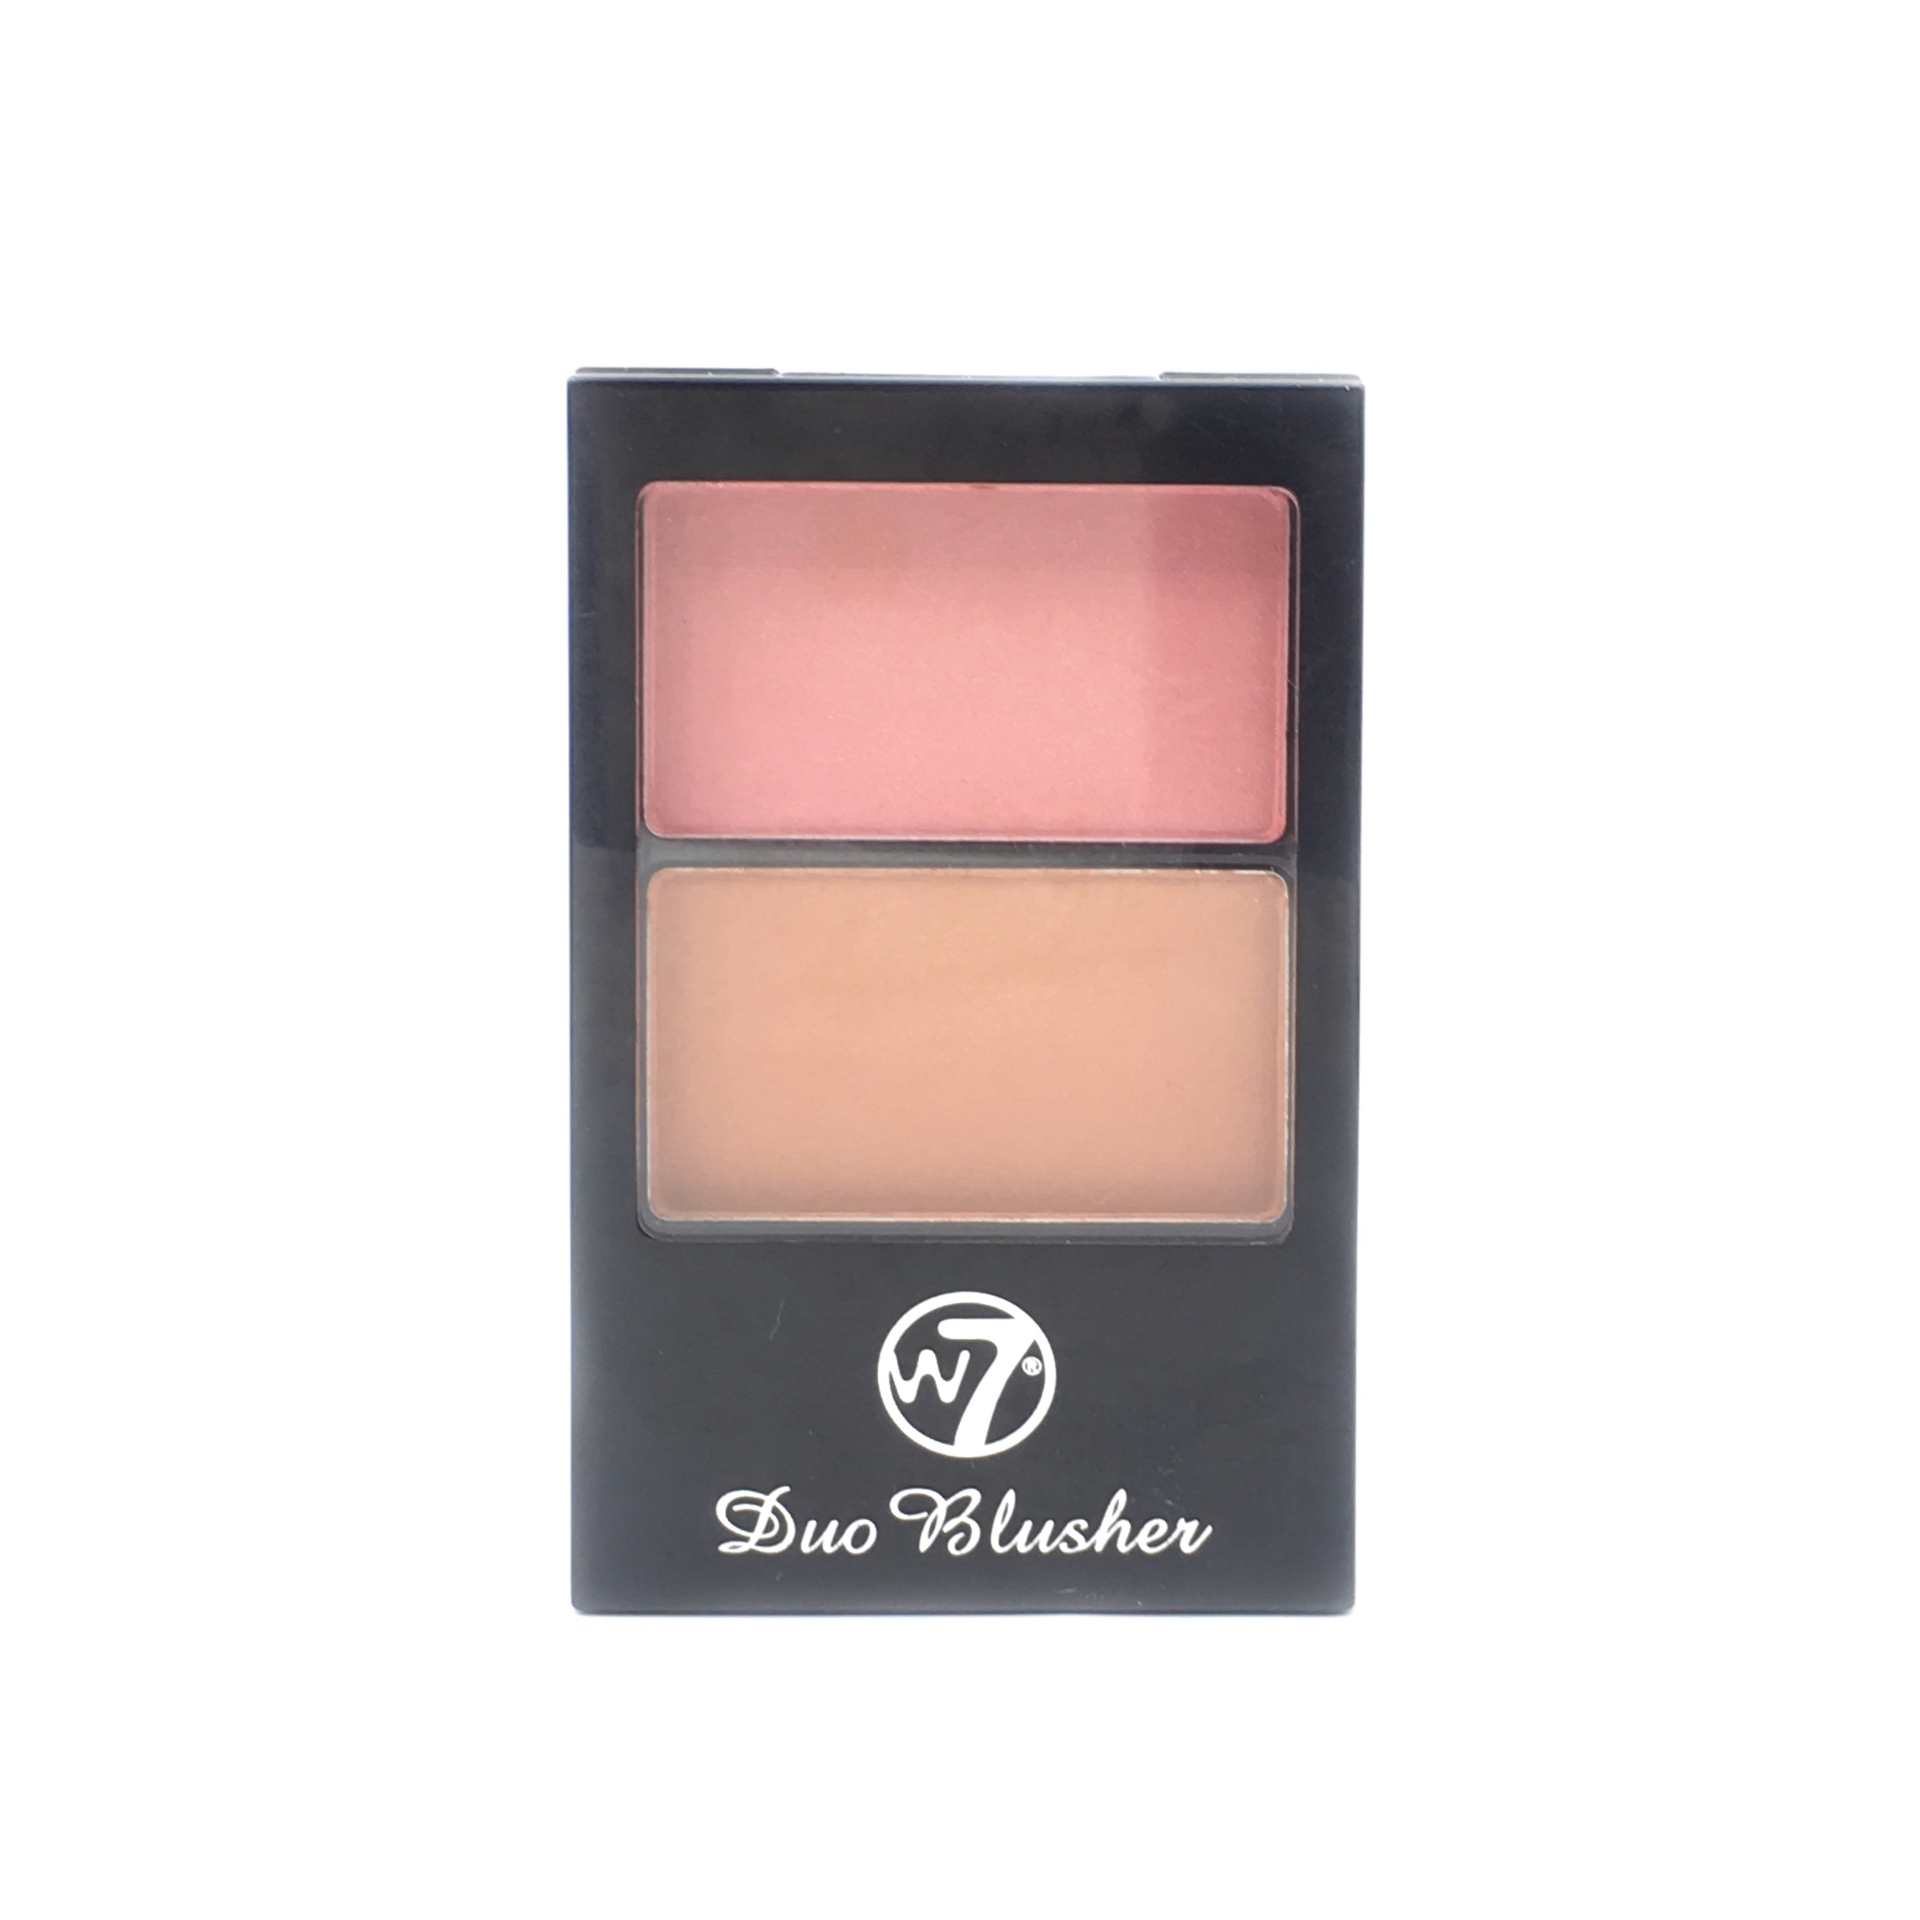 W7 Duo Blusher 03 Set and Palette